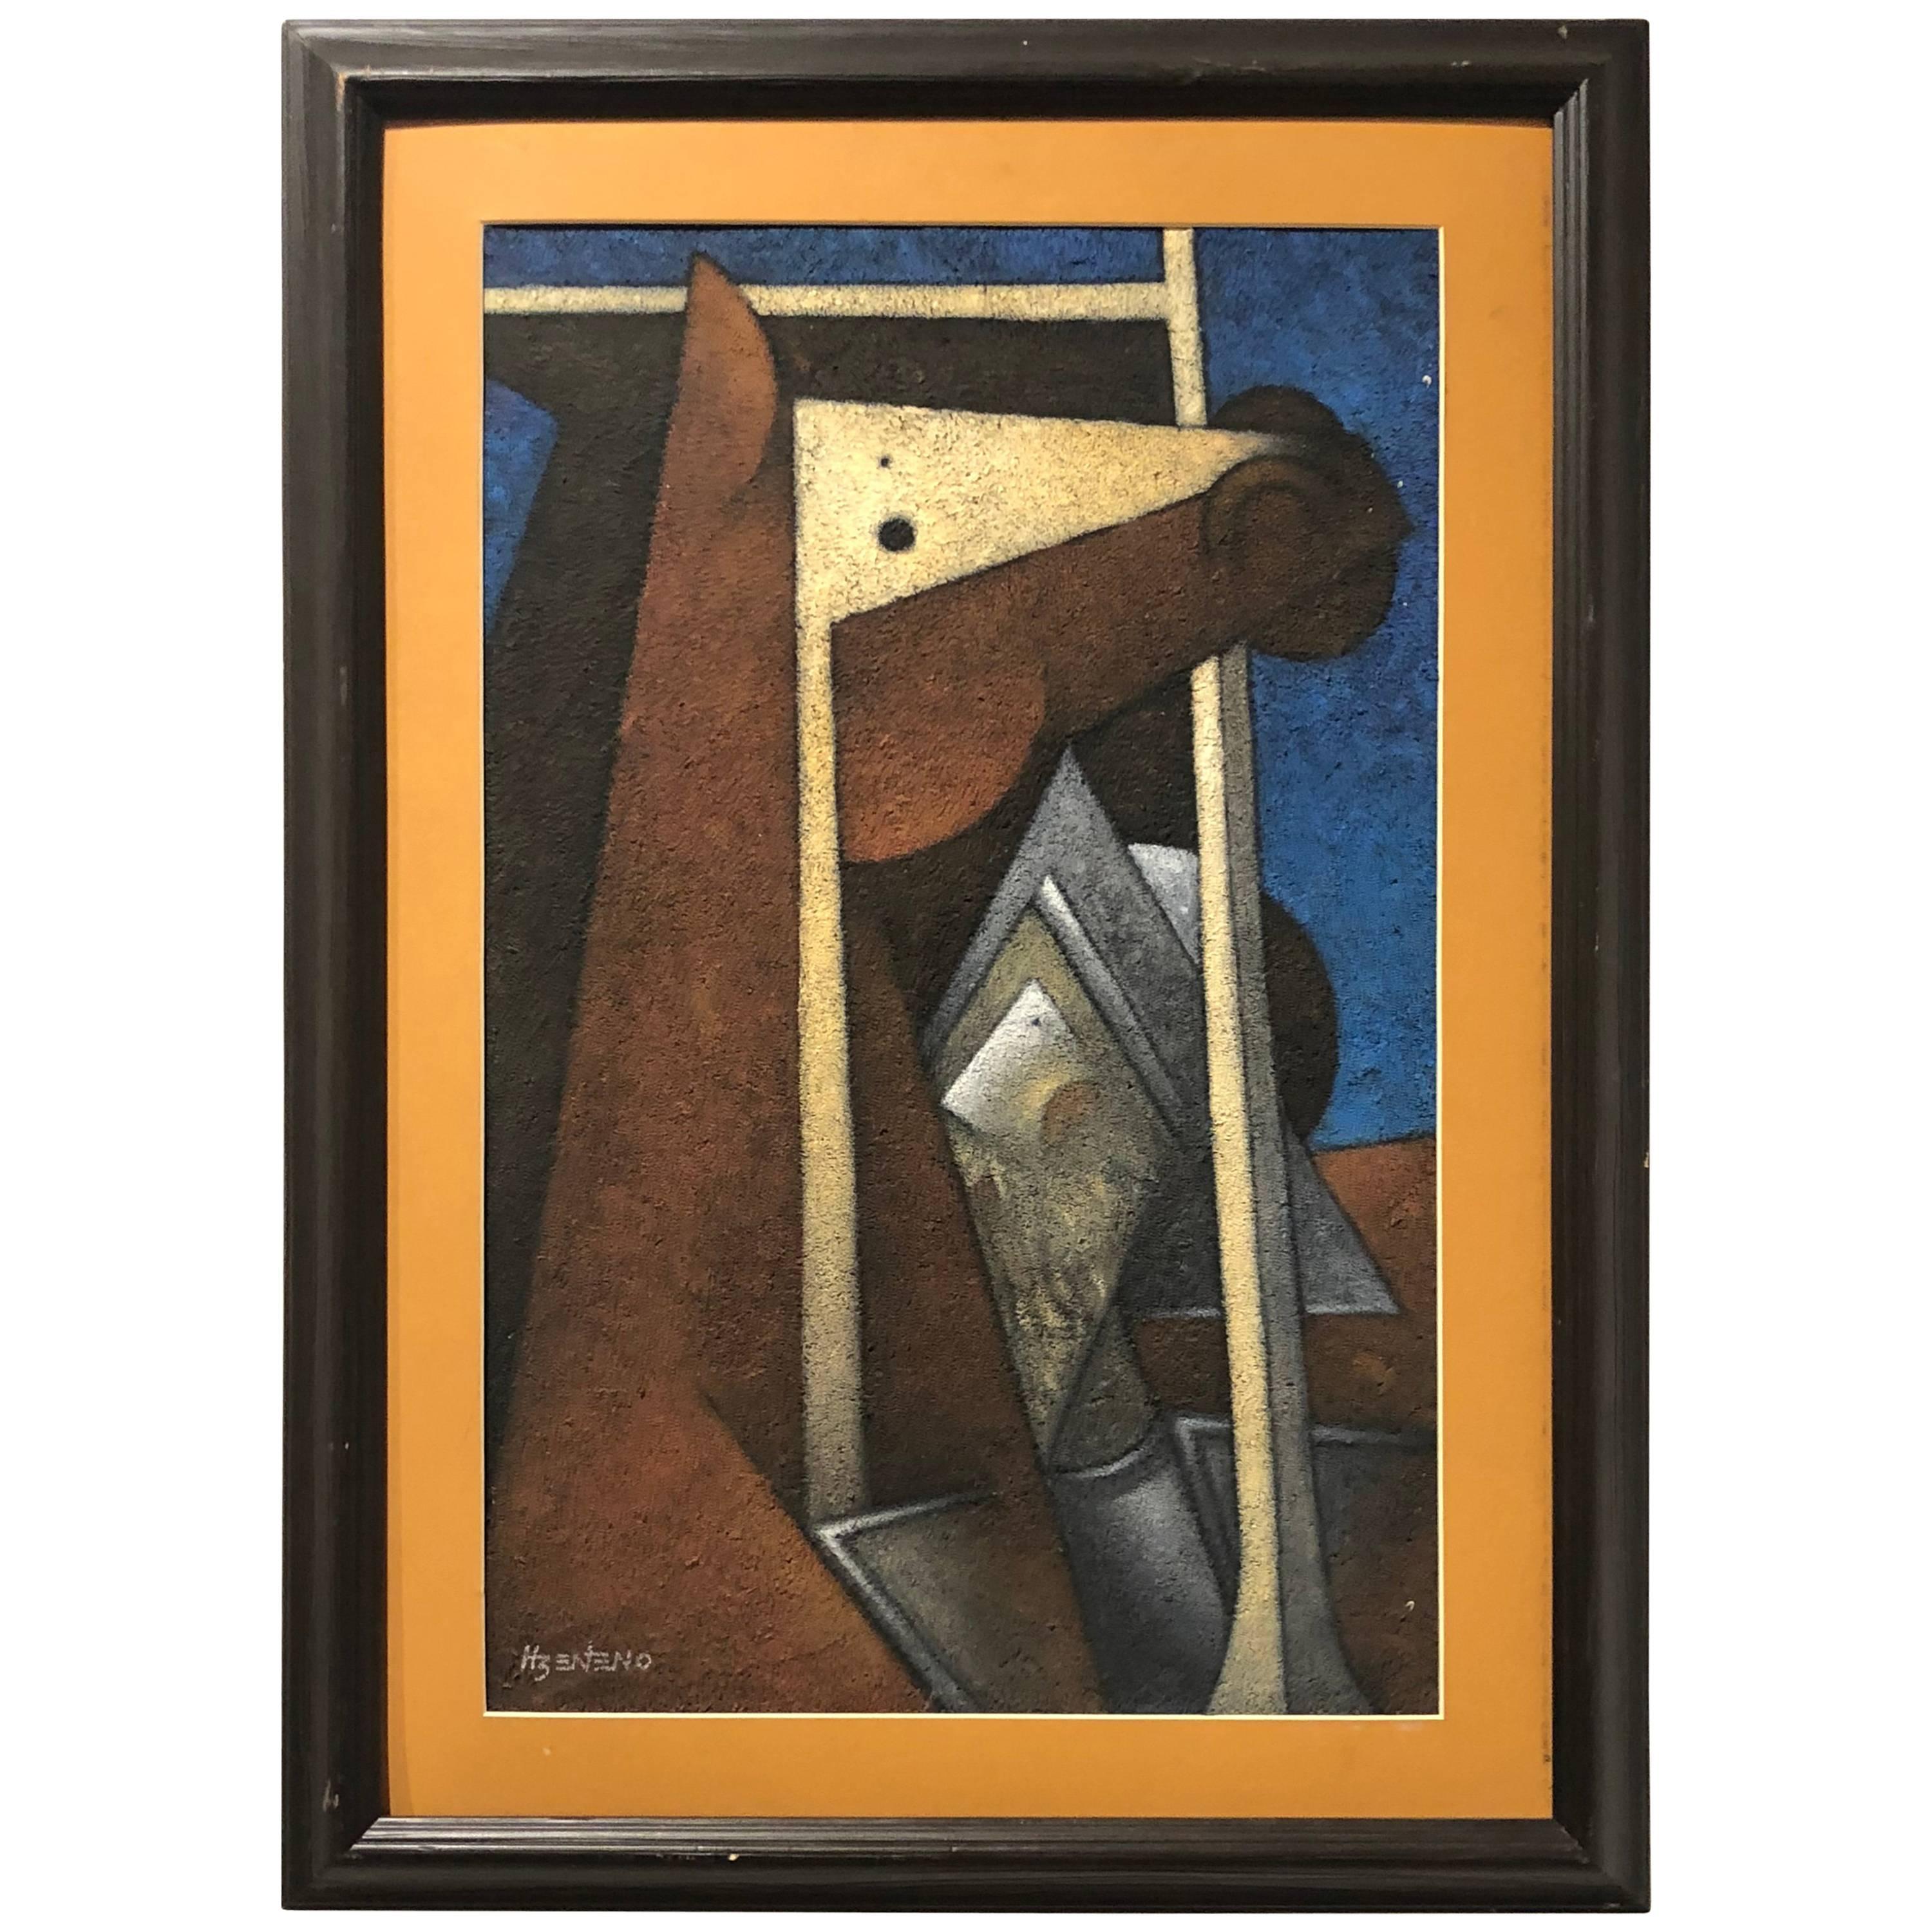 1960s Cubist Textured Painting by Mexican Artist - H Zenteno